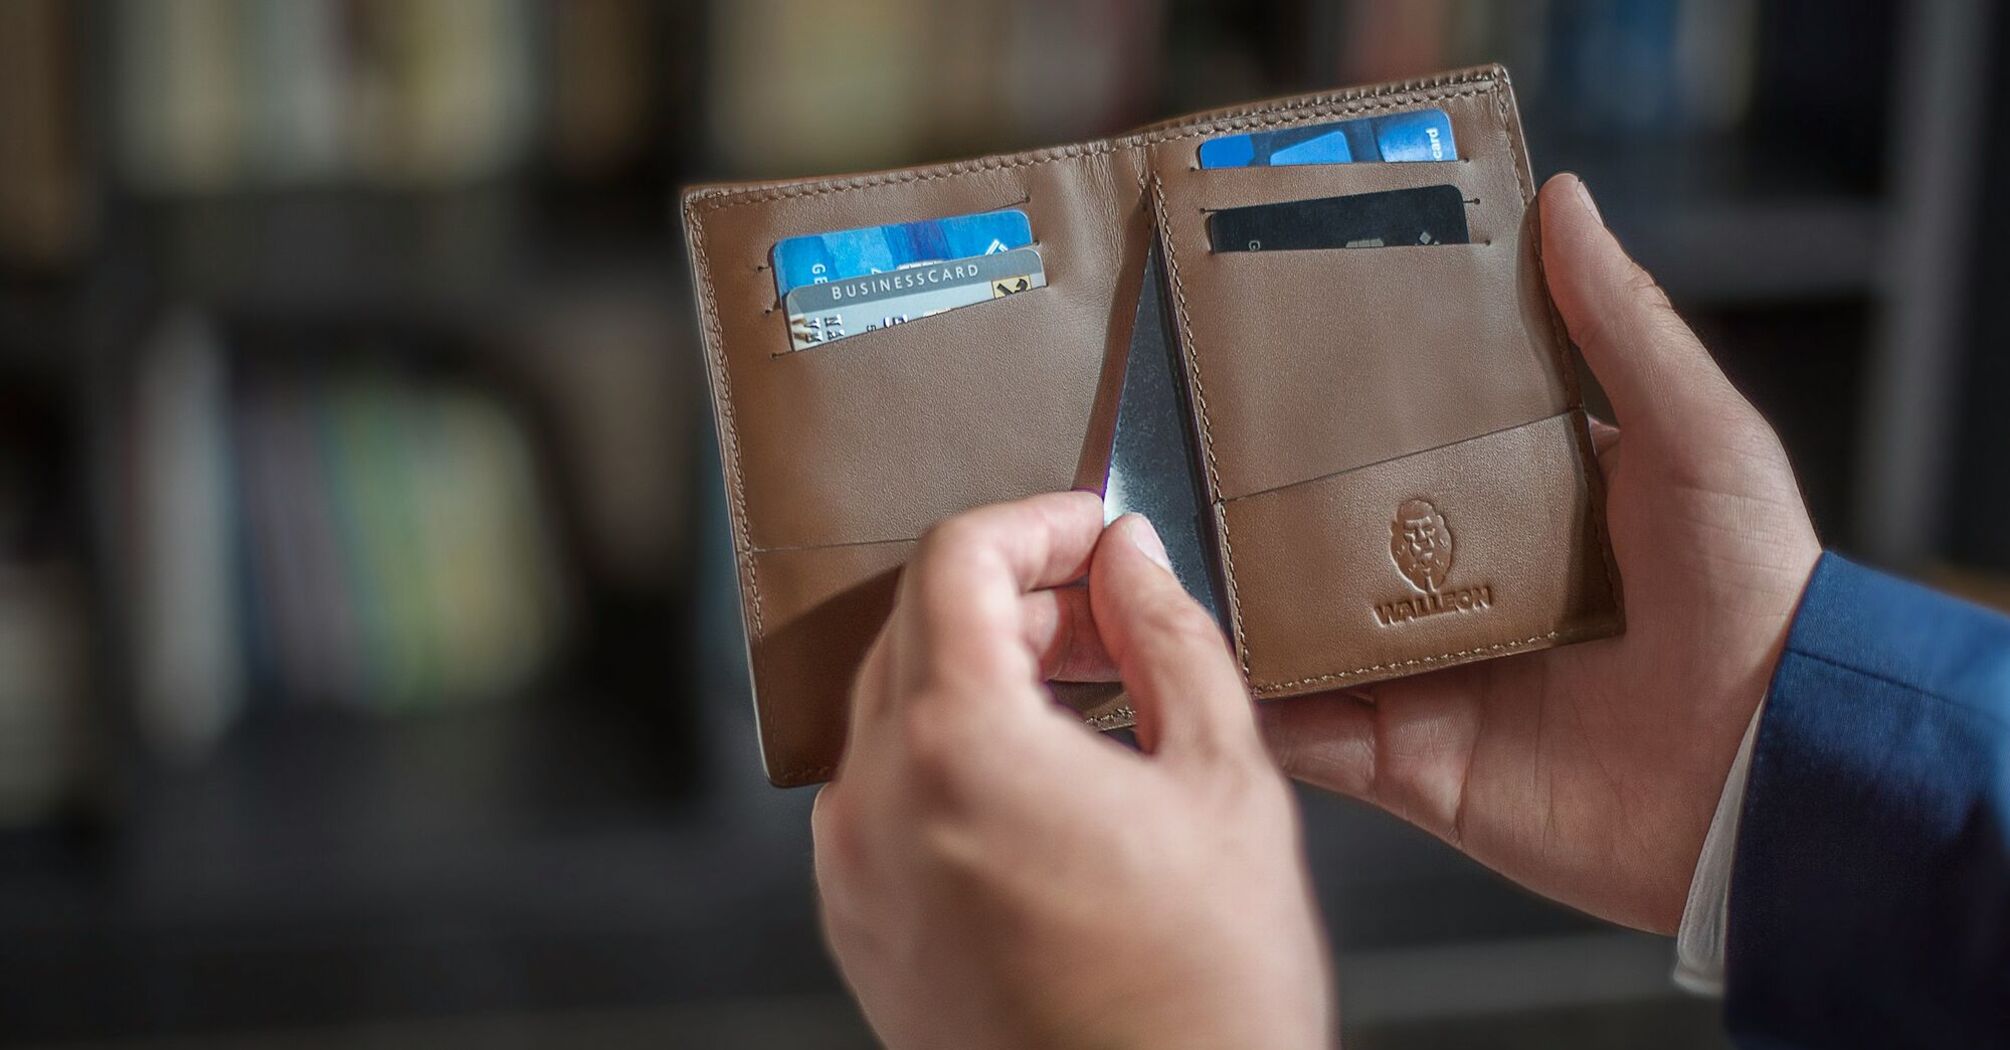 Person holding an open brown leather wallet showing various cards